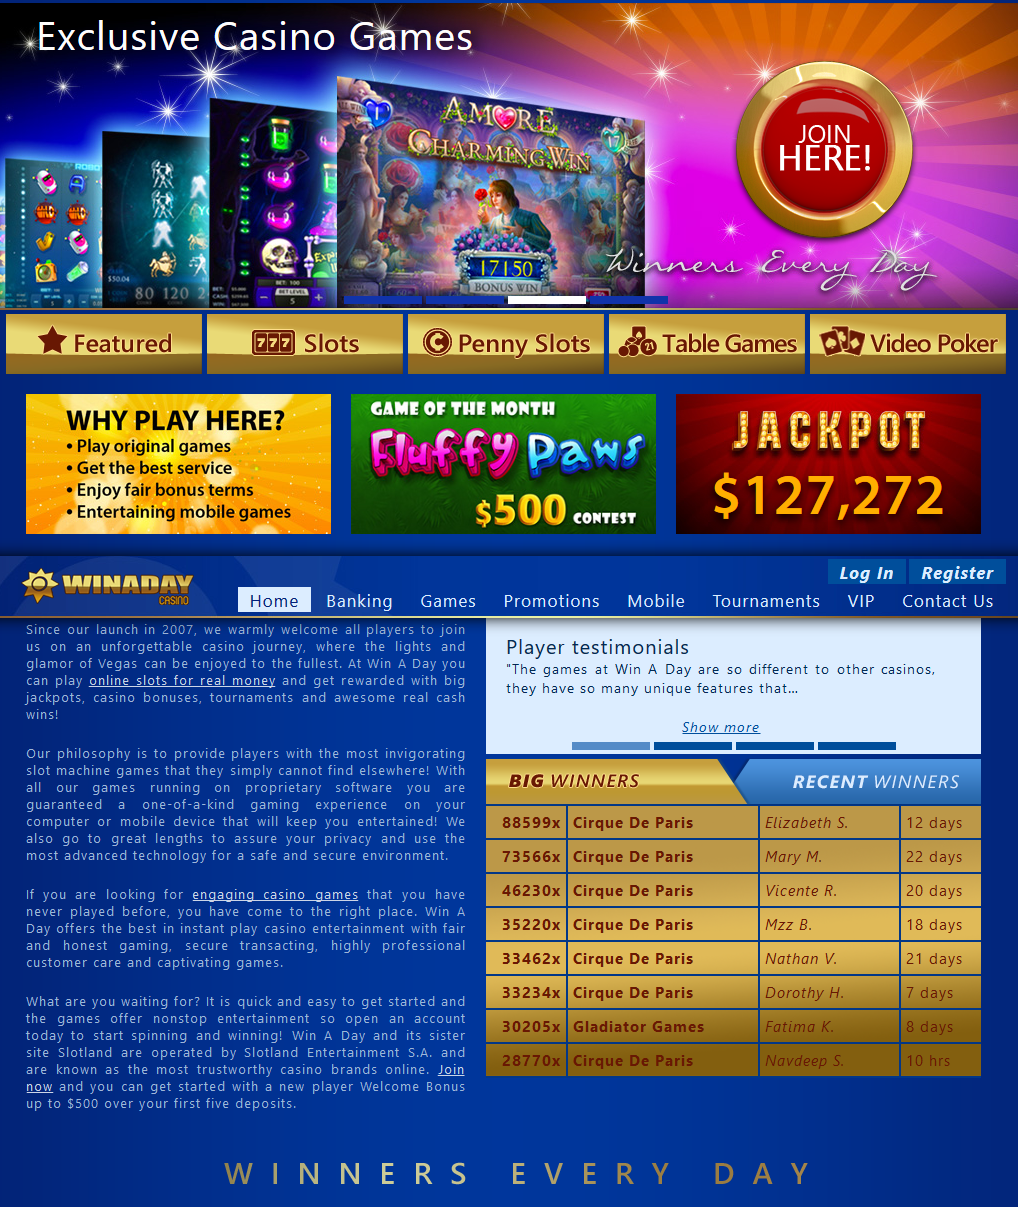 All NEW Online Casino Games are waiting
                                                          for YOU at Win
                                                          A Day Casino